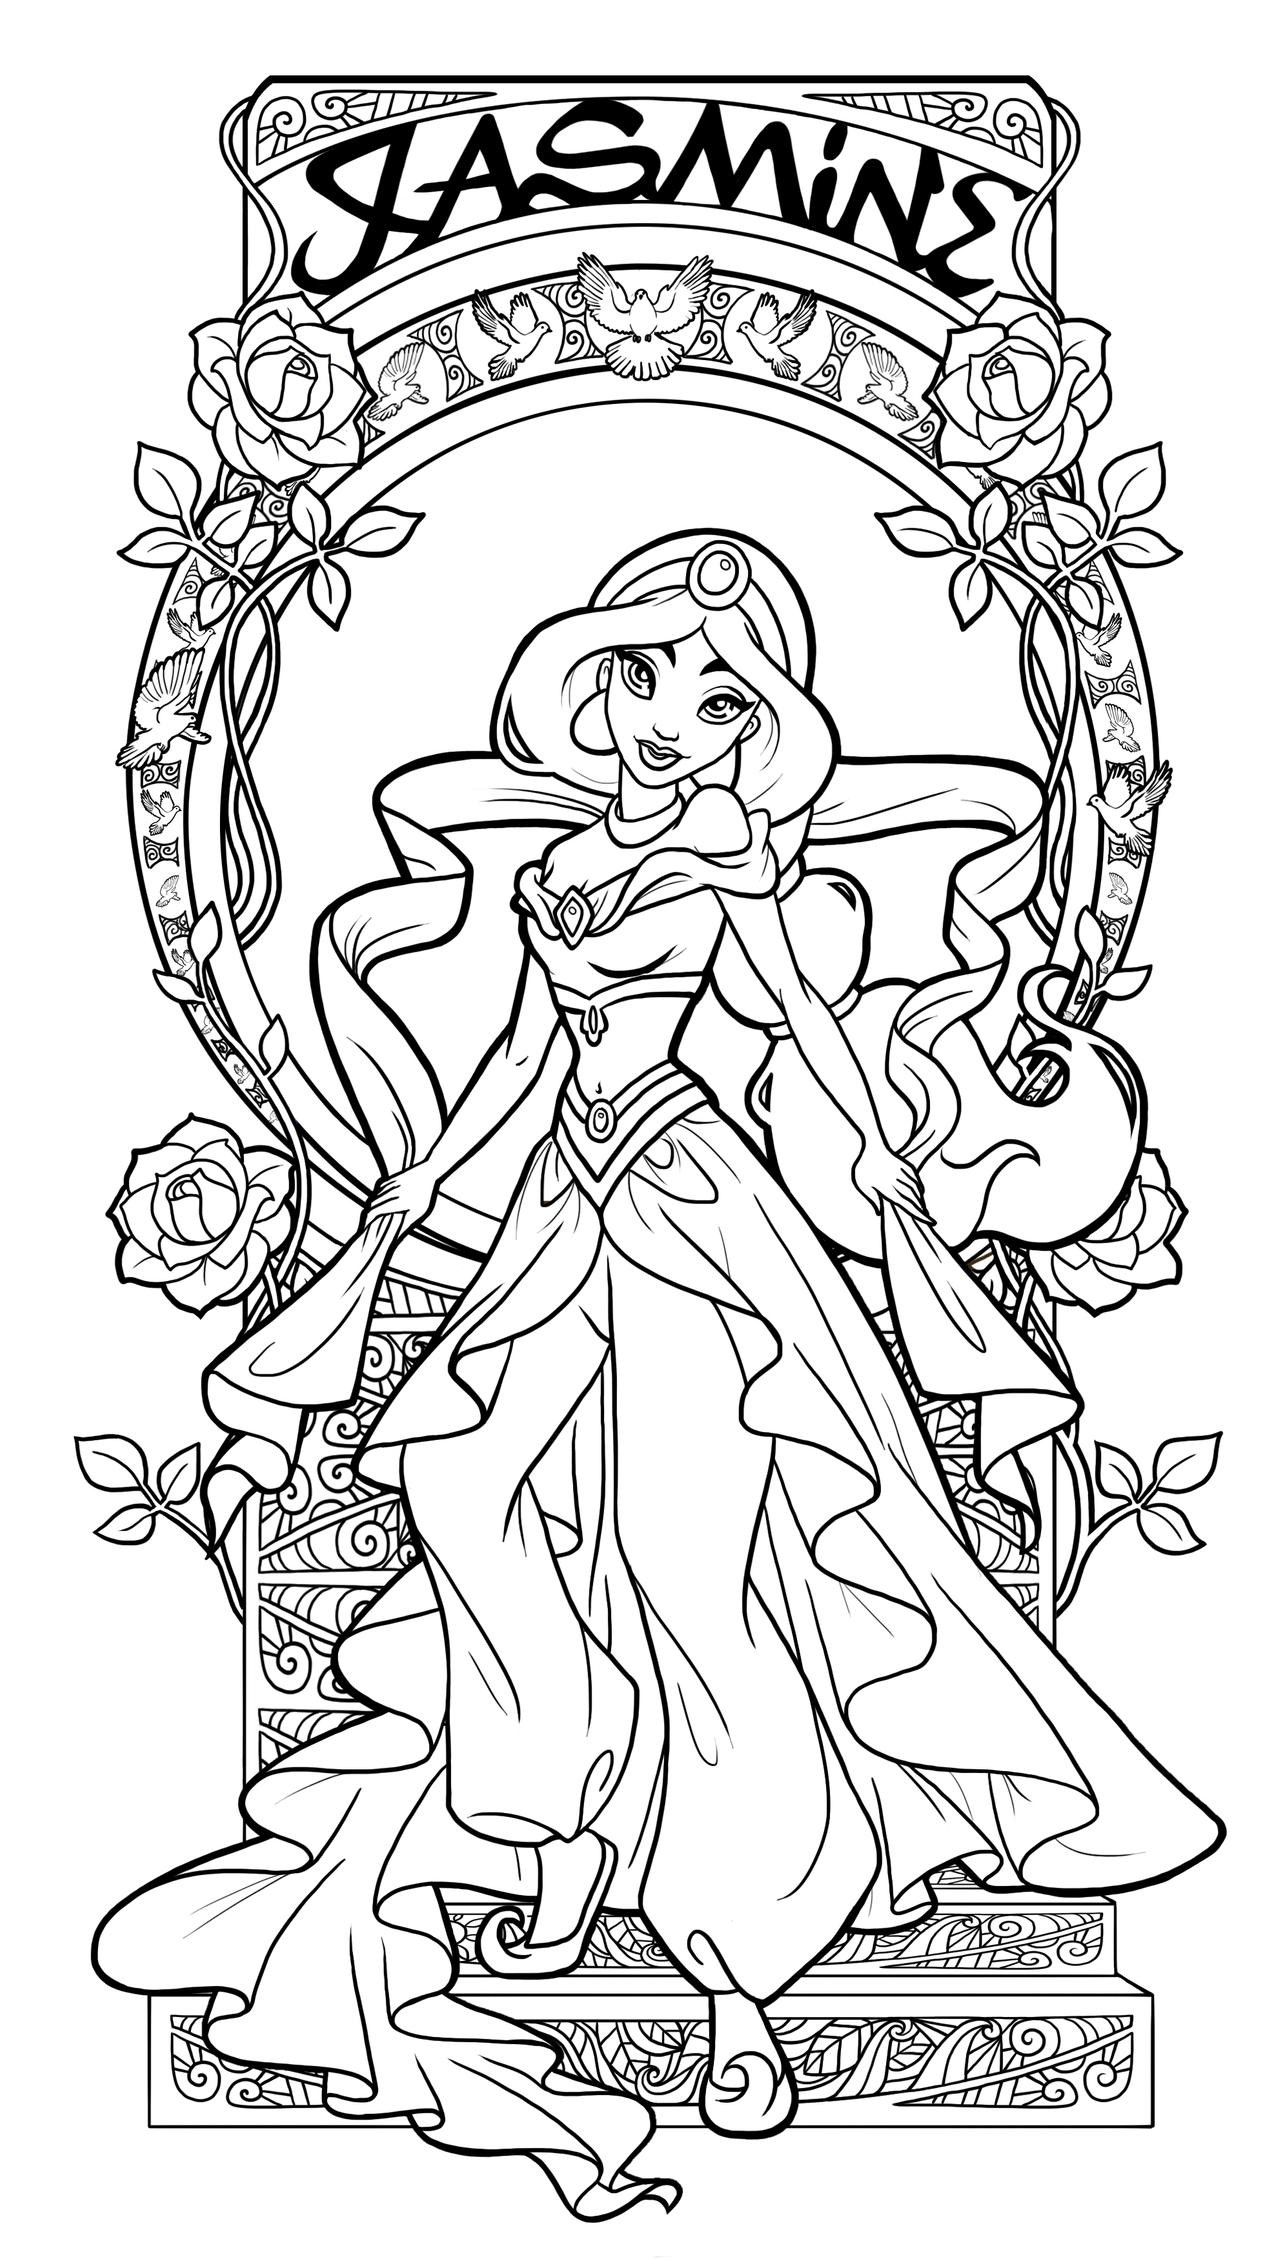 Adult Disney Coloring Pages
 Jasmine Art Nouveau Lineart by Paola Tosca on DeviantArt